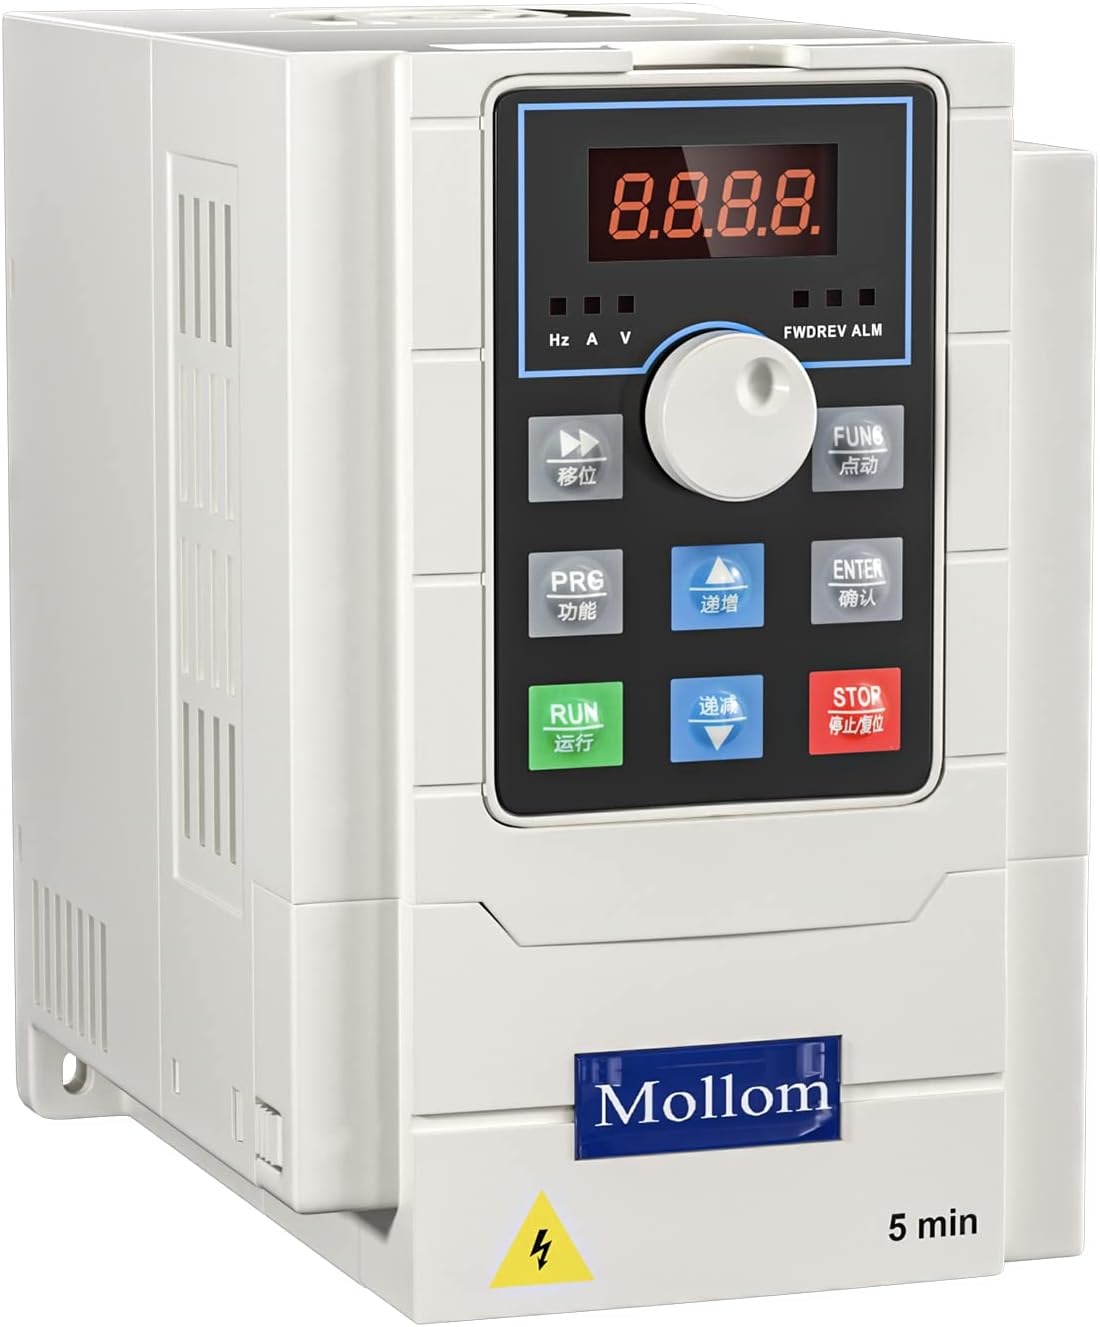 Mollom VFD 220V 1.5KW 2HP Single Phase Input 3 Phase 0-999Hz Output Variable Frequency Drive CNC Motor Inverter Converter for Spindle